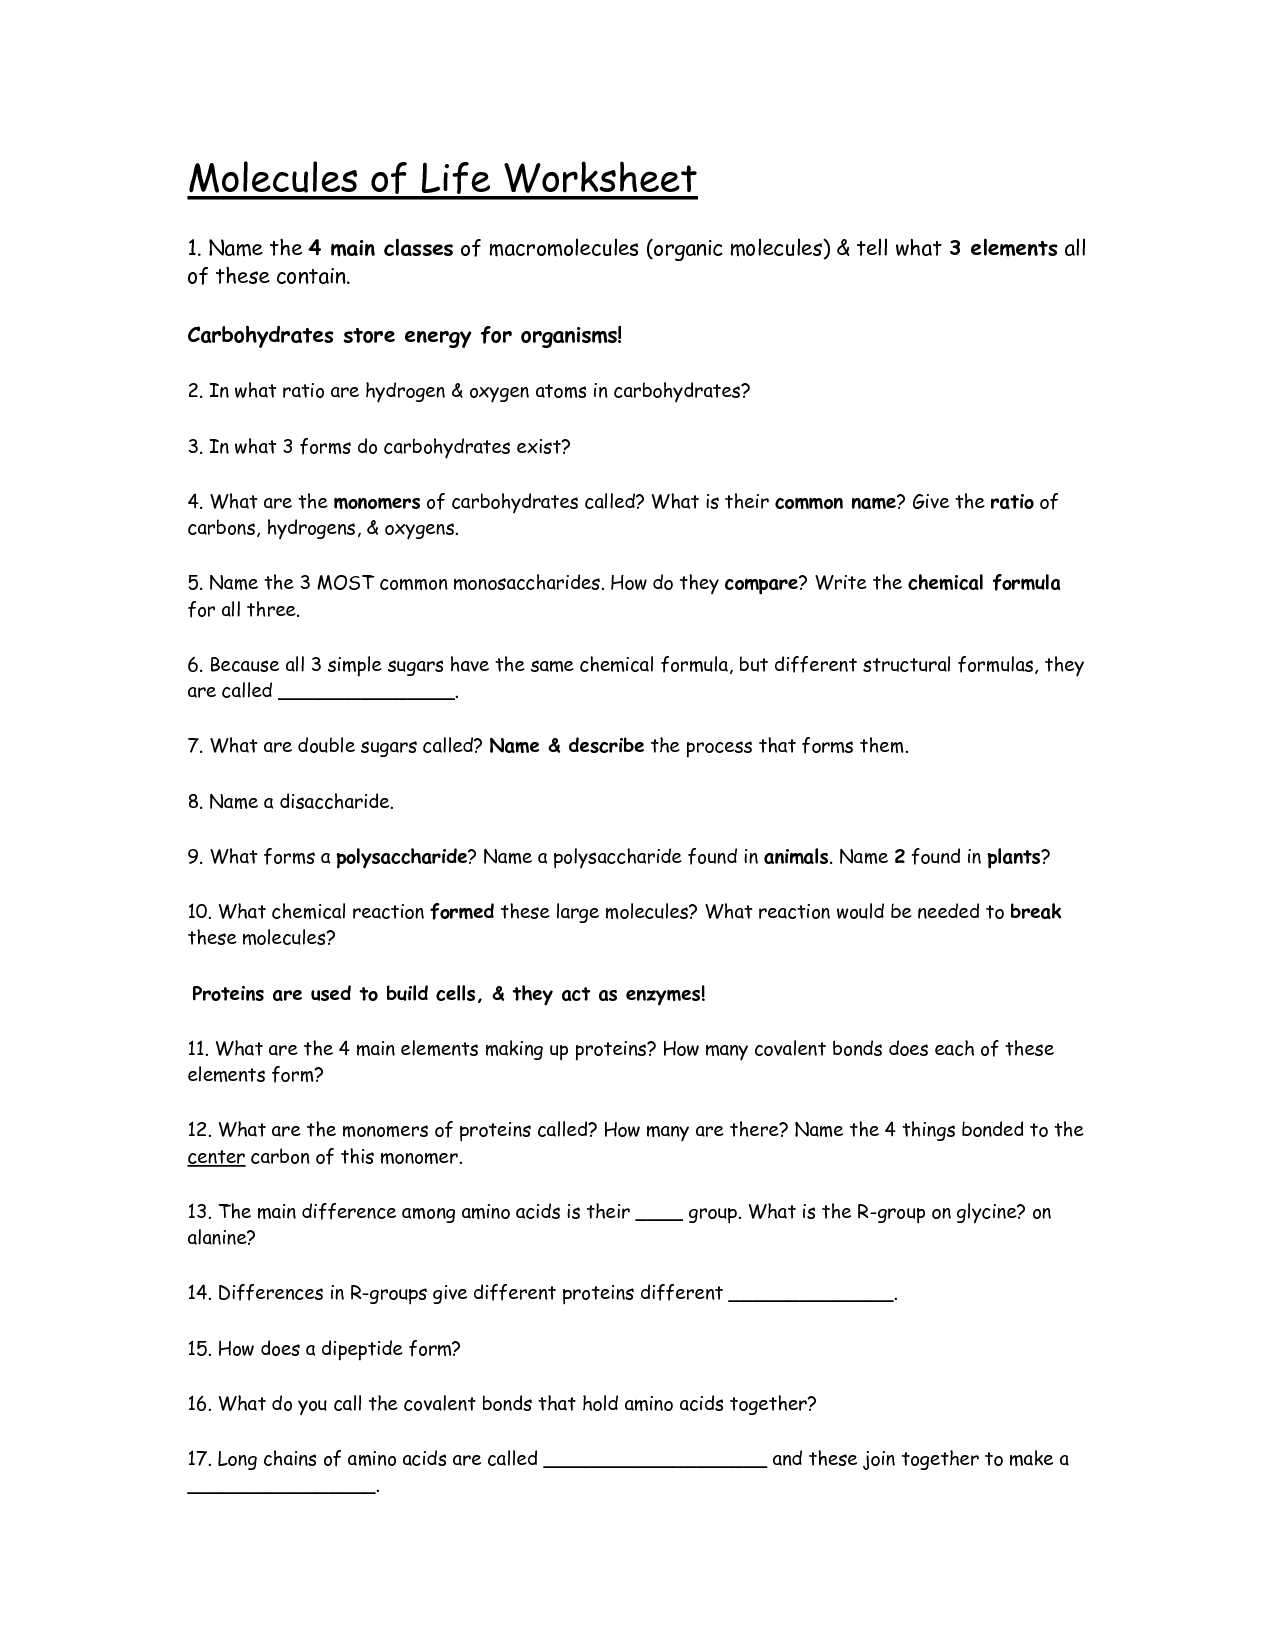 Book Of Life Worksheet Answers